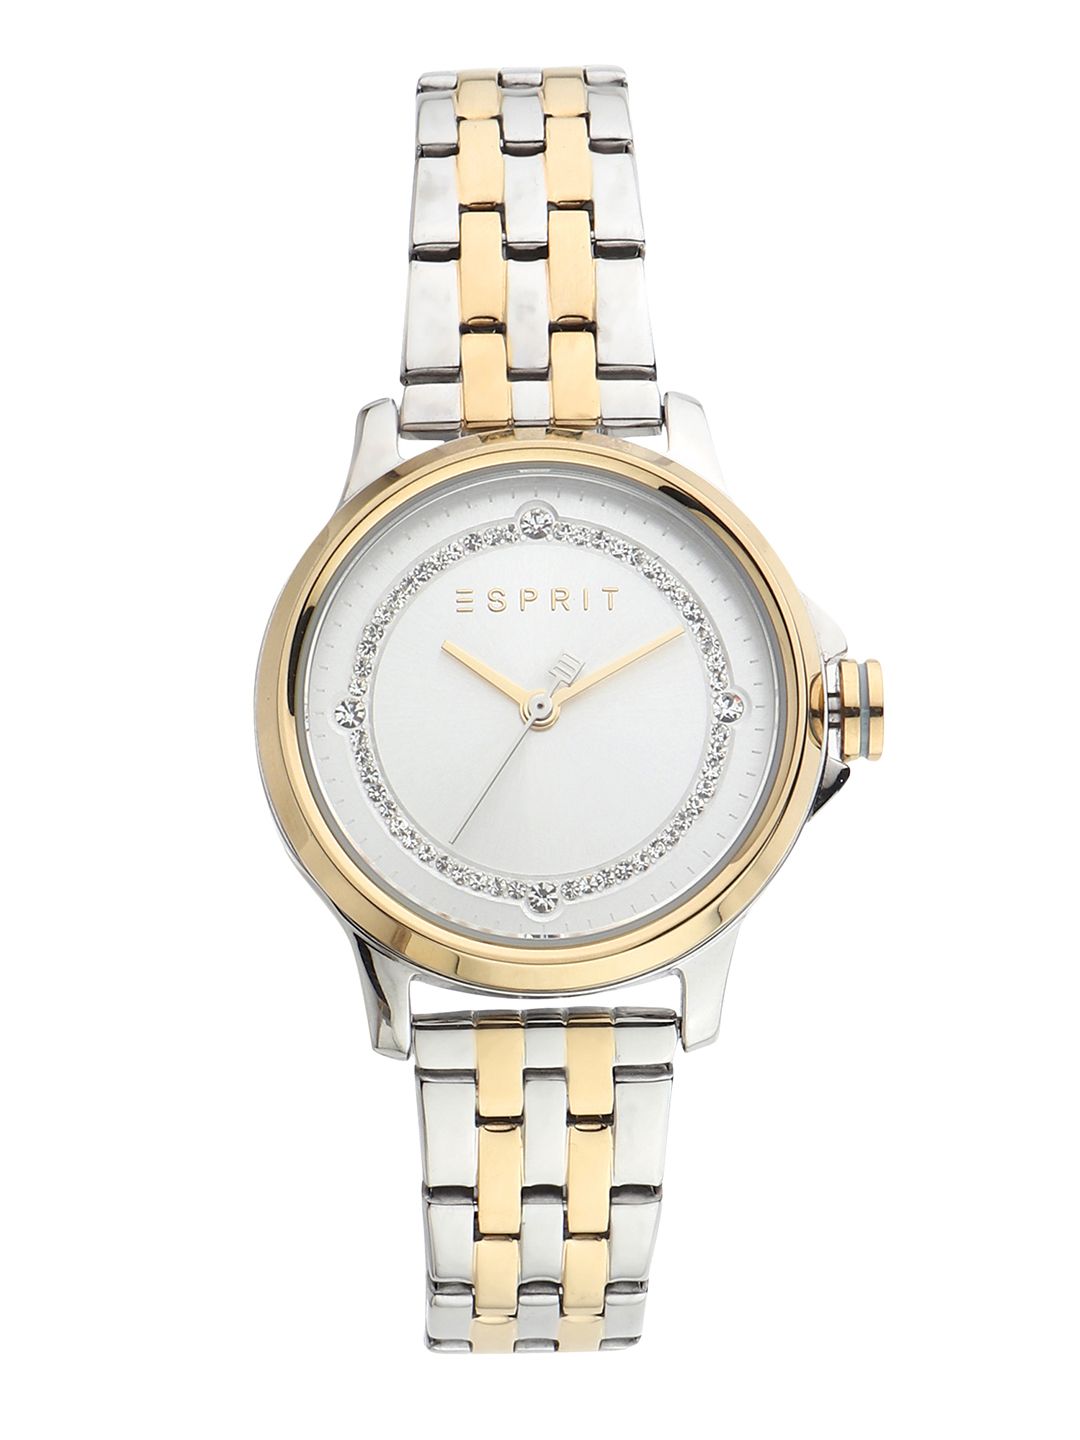 ESPRIT Women Silver-Toned Embellished Analogue Watch ES1L144M0105 Price in India